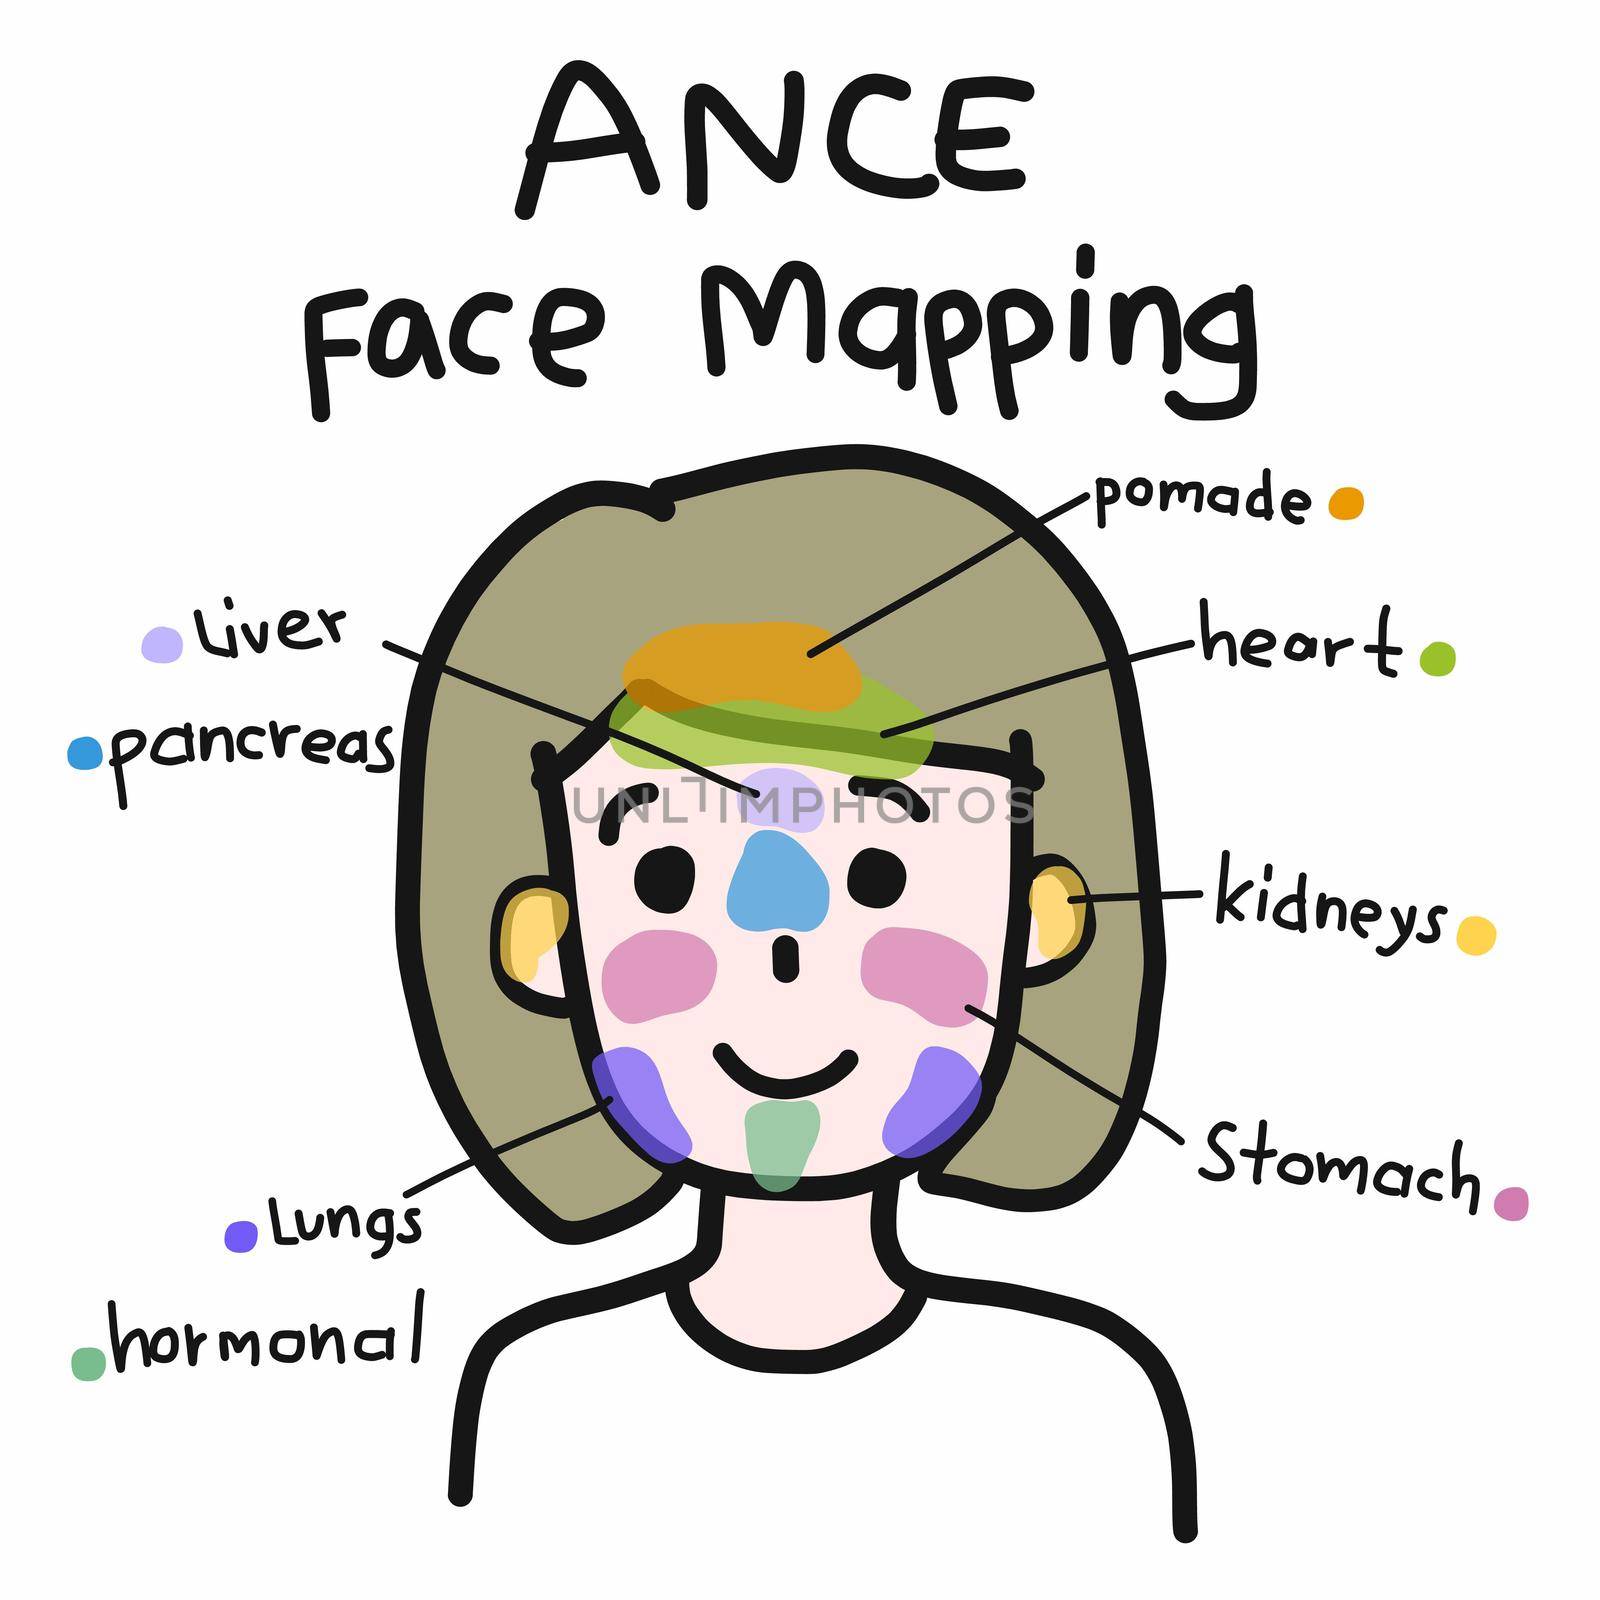 Face mapping for acne , Cute woman cartoon face vector illustration by Yoopho